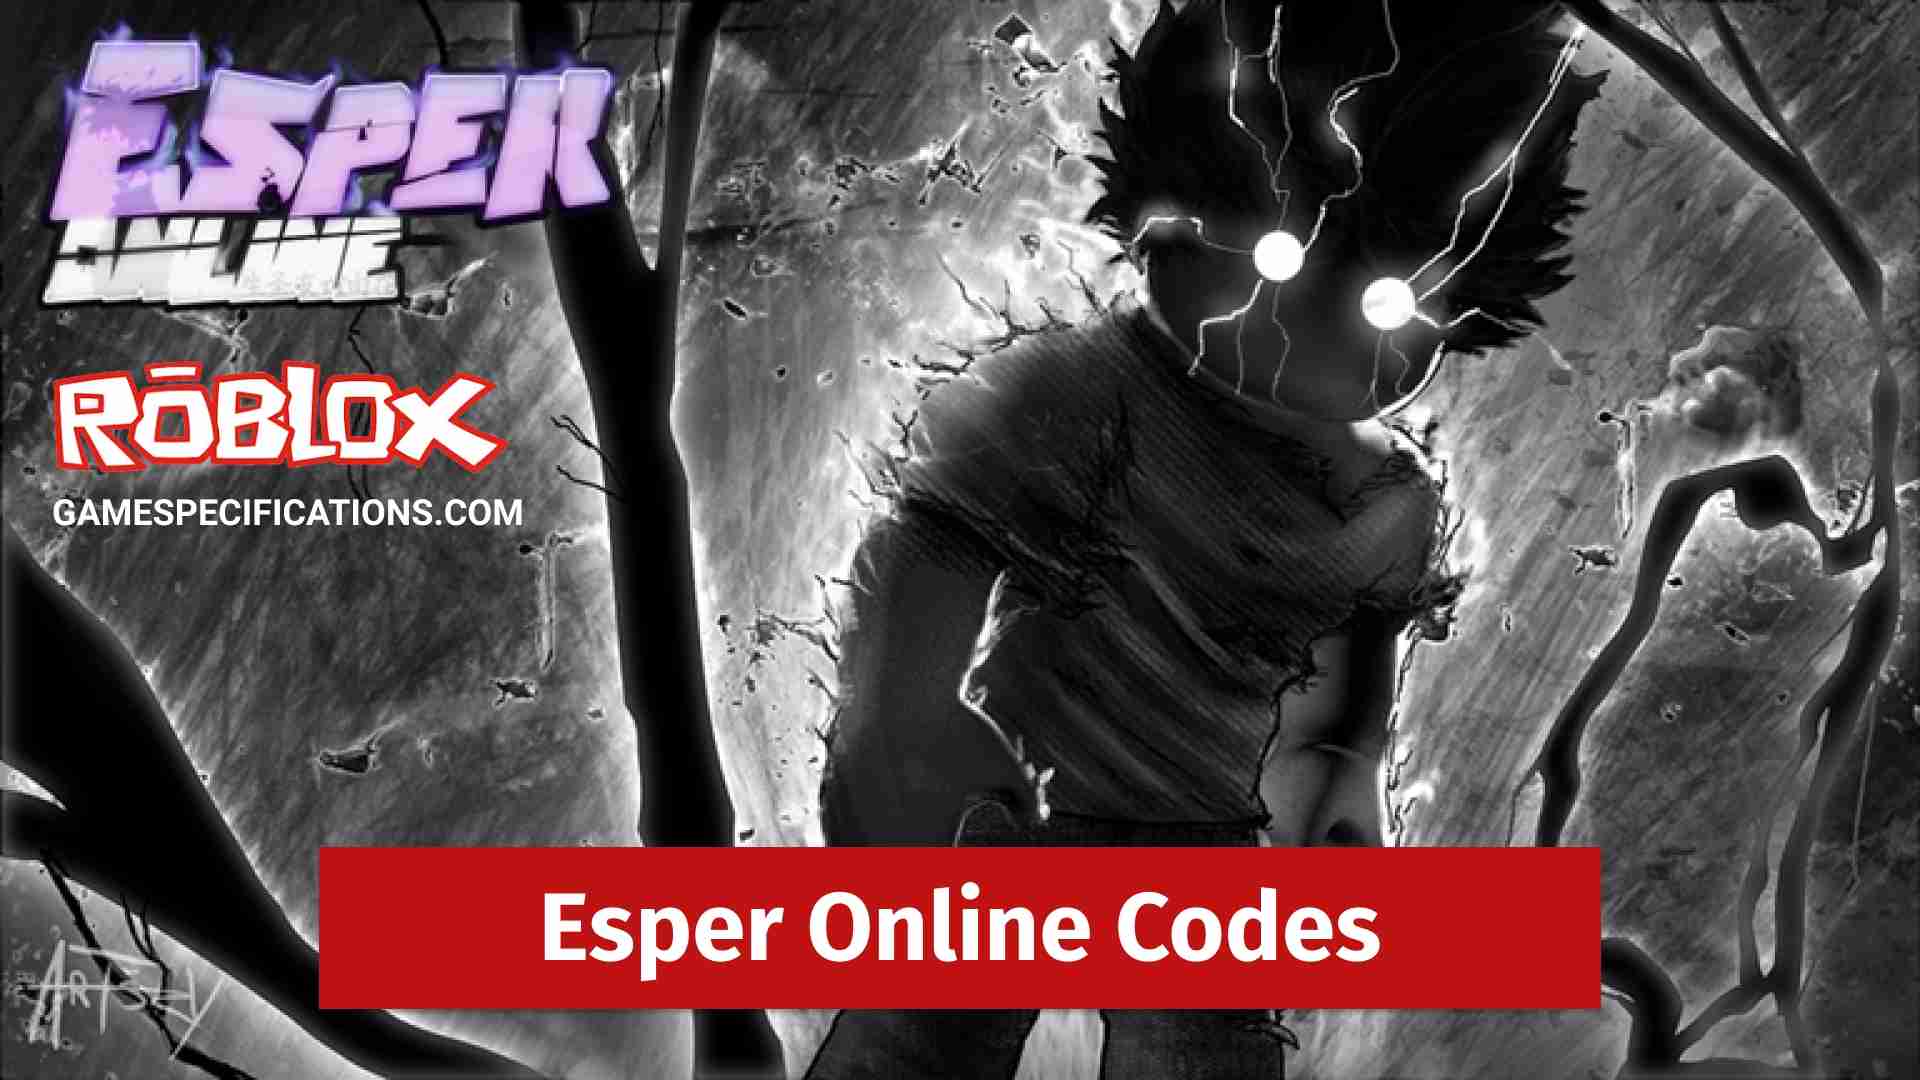 Roblox Esper Online Codes July 2021 Game Specifications - codes for pyro simulator roblox